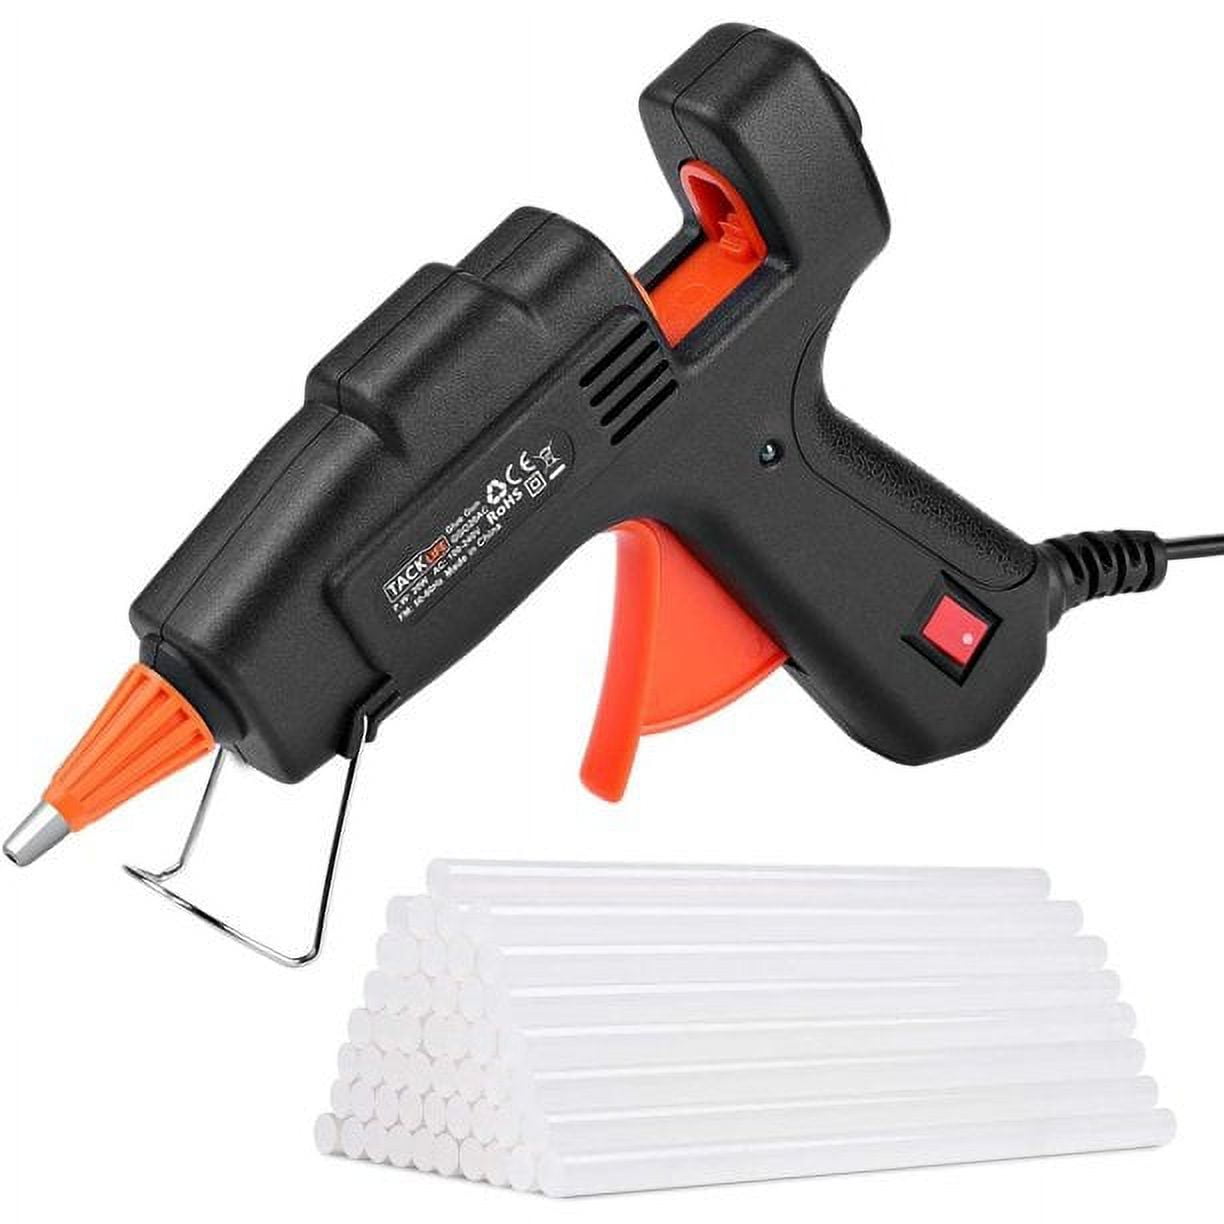 TOPINCN Mini Hot Glue Guns with Sticks 20w Hot Melting Glue Guns for DIY  Arts Craft 110-240v Suitable for Pasting Toy Models Making Beautiful